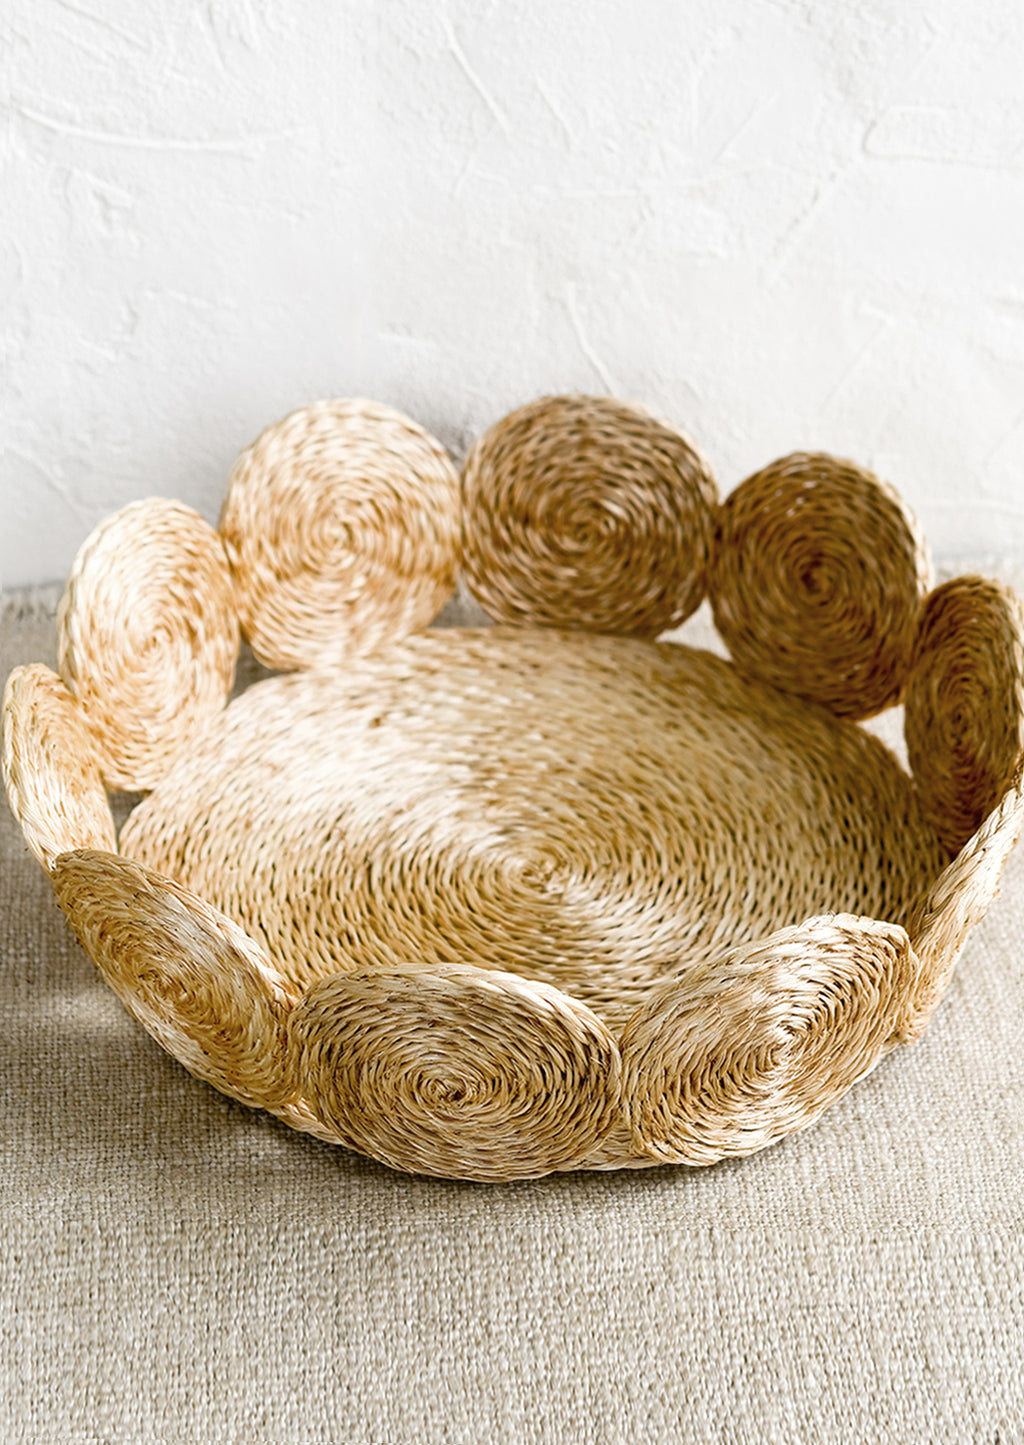 Natural / Small: A round, shallow basket with woven circular border design in natural.